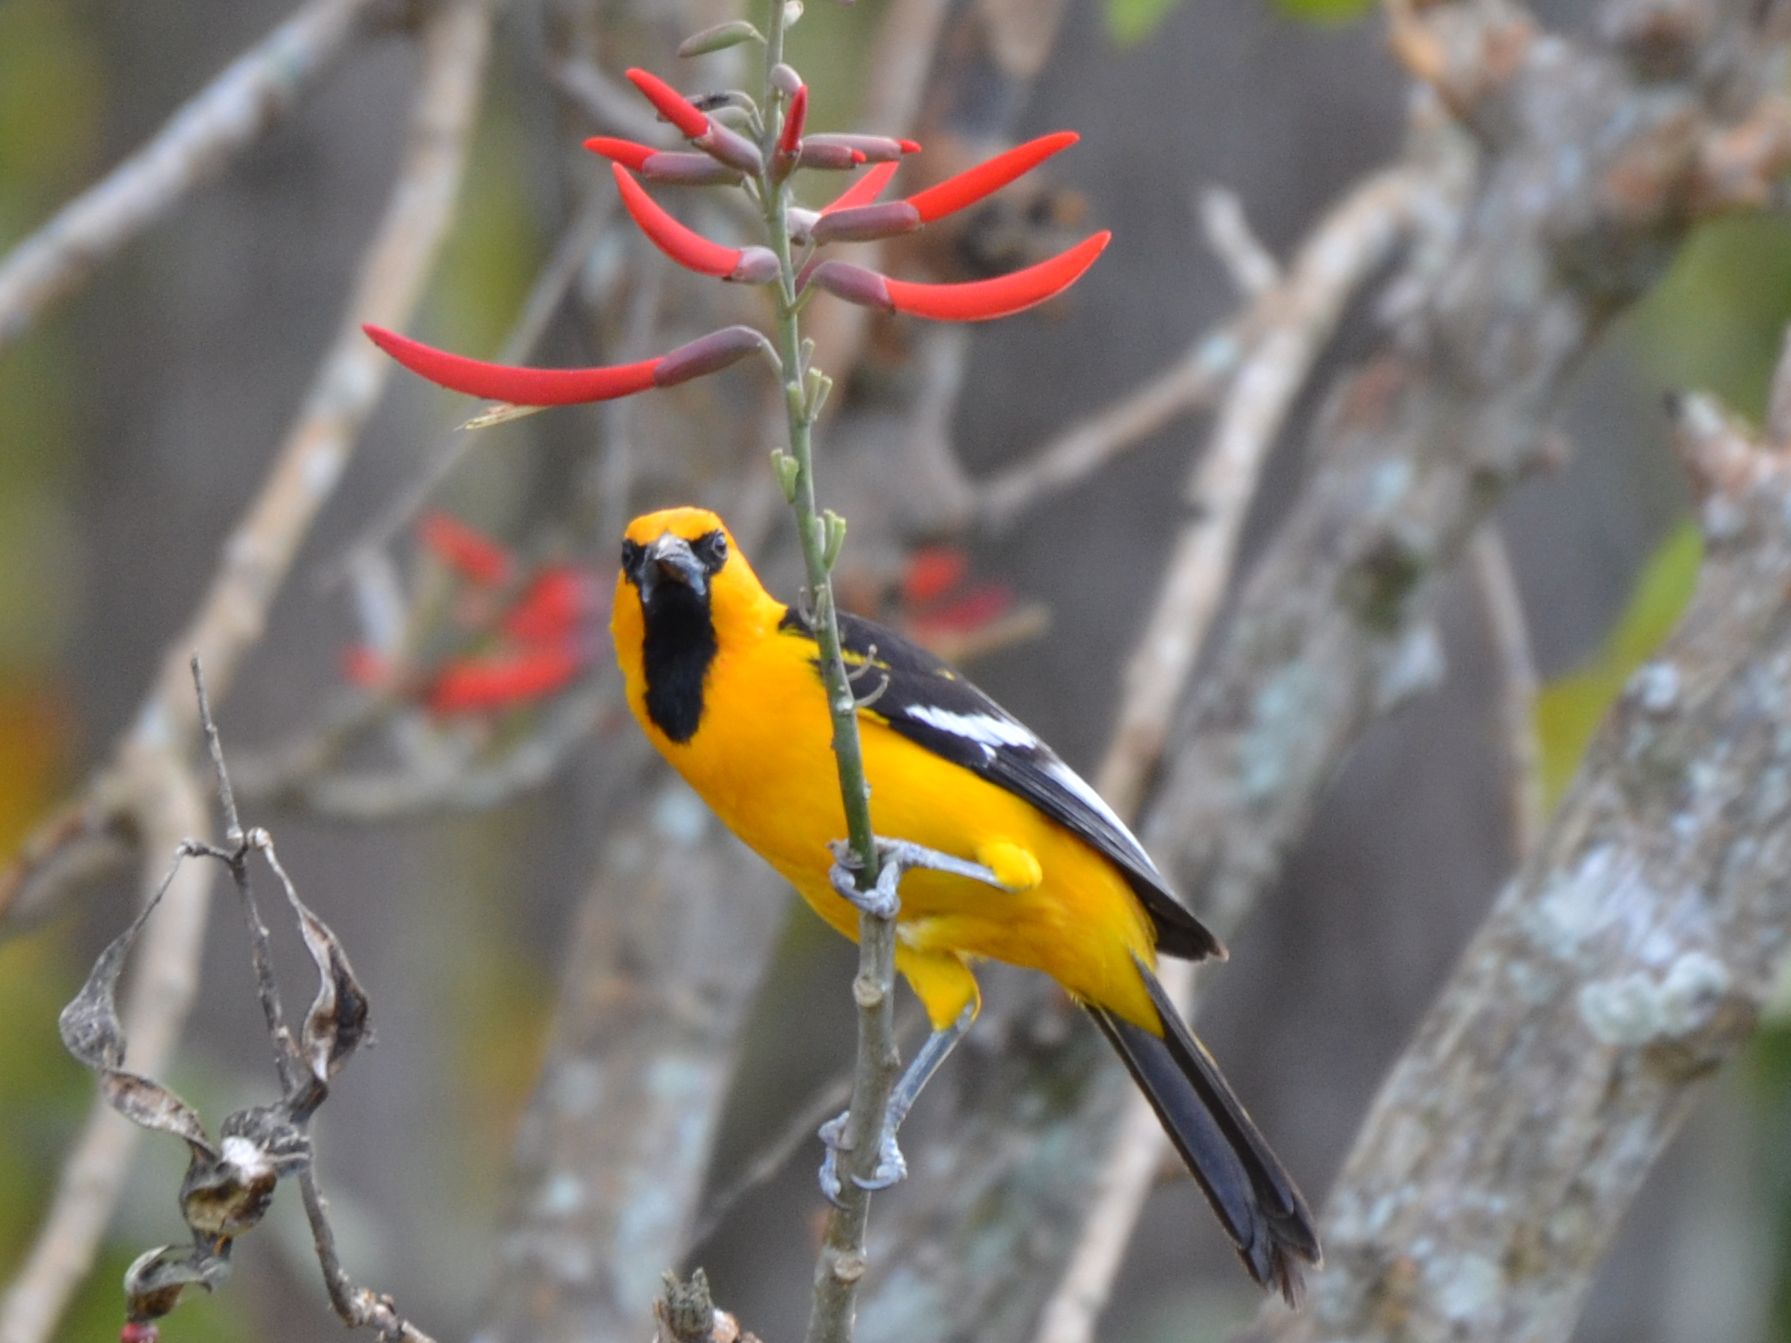 Click picture to see more Altamira Orioles.